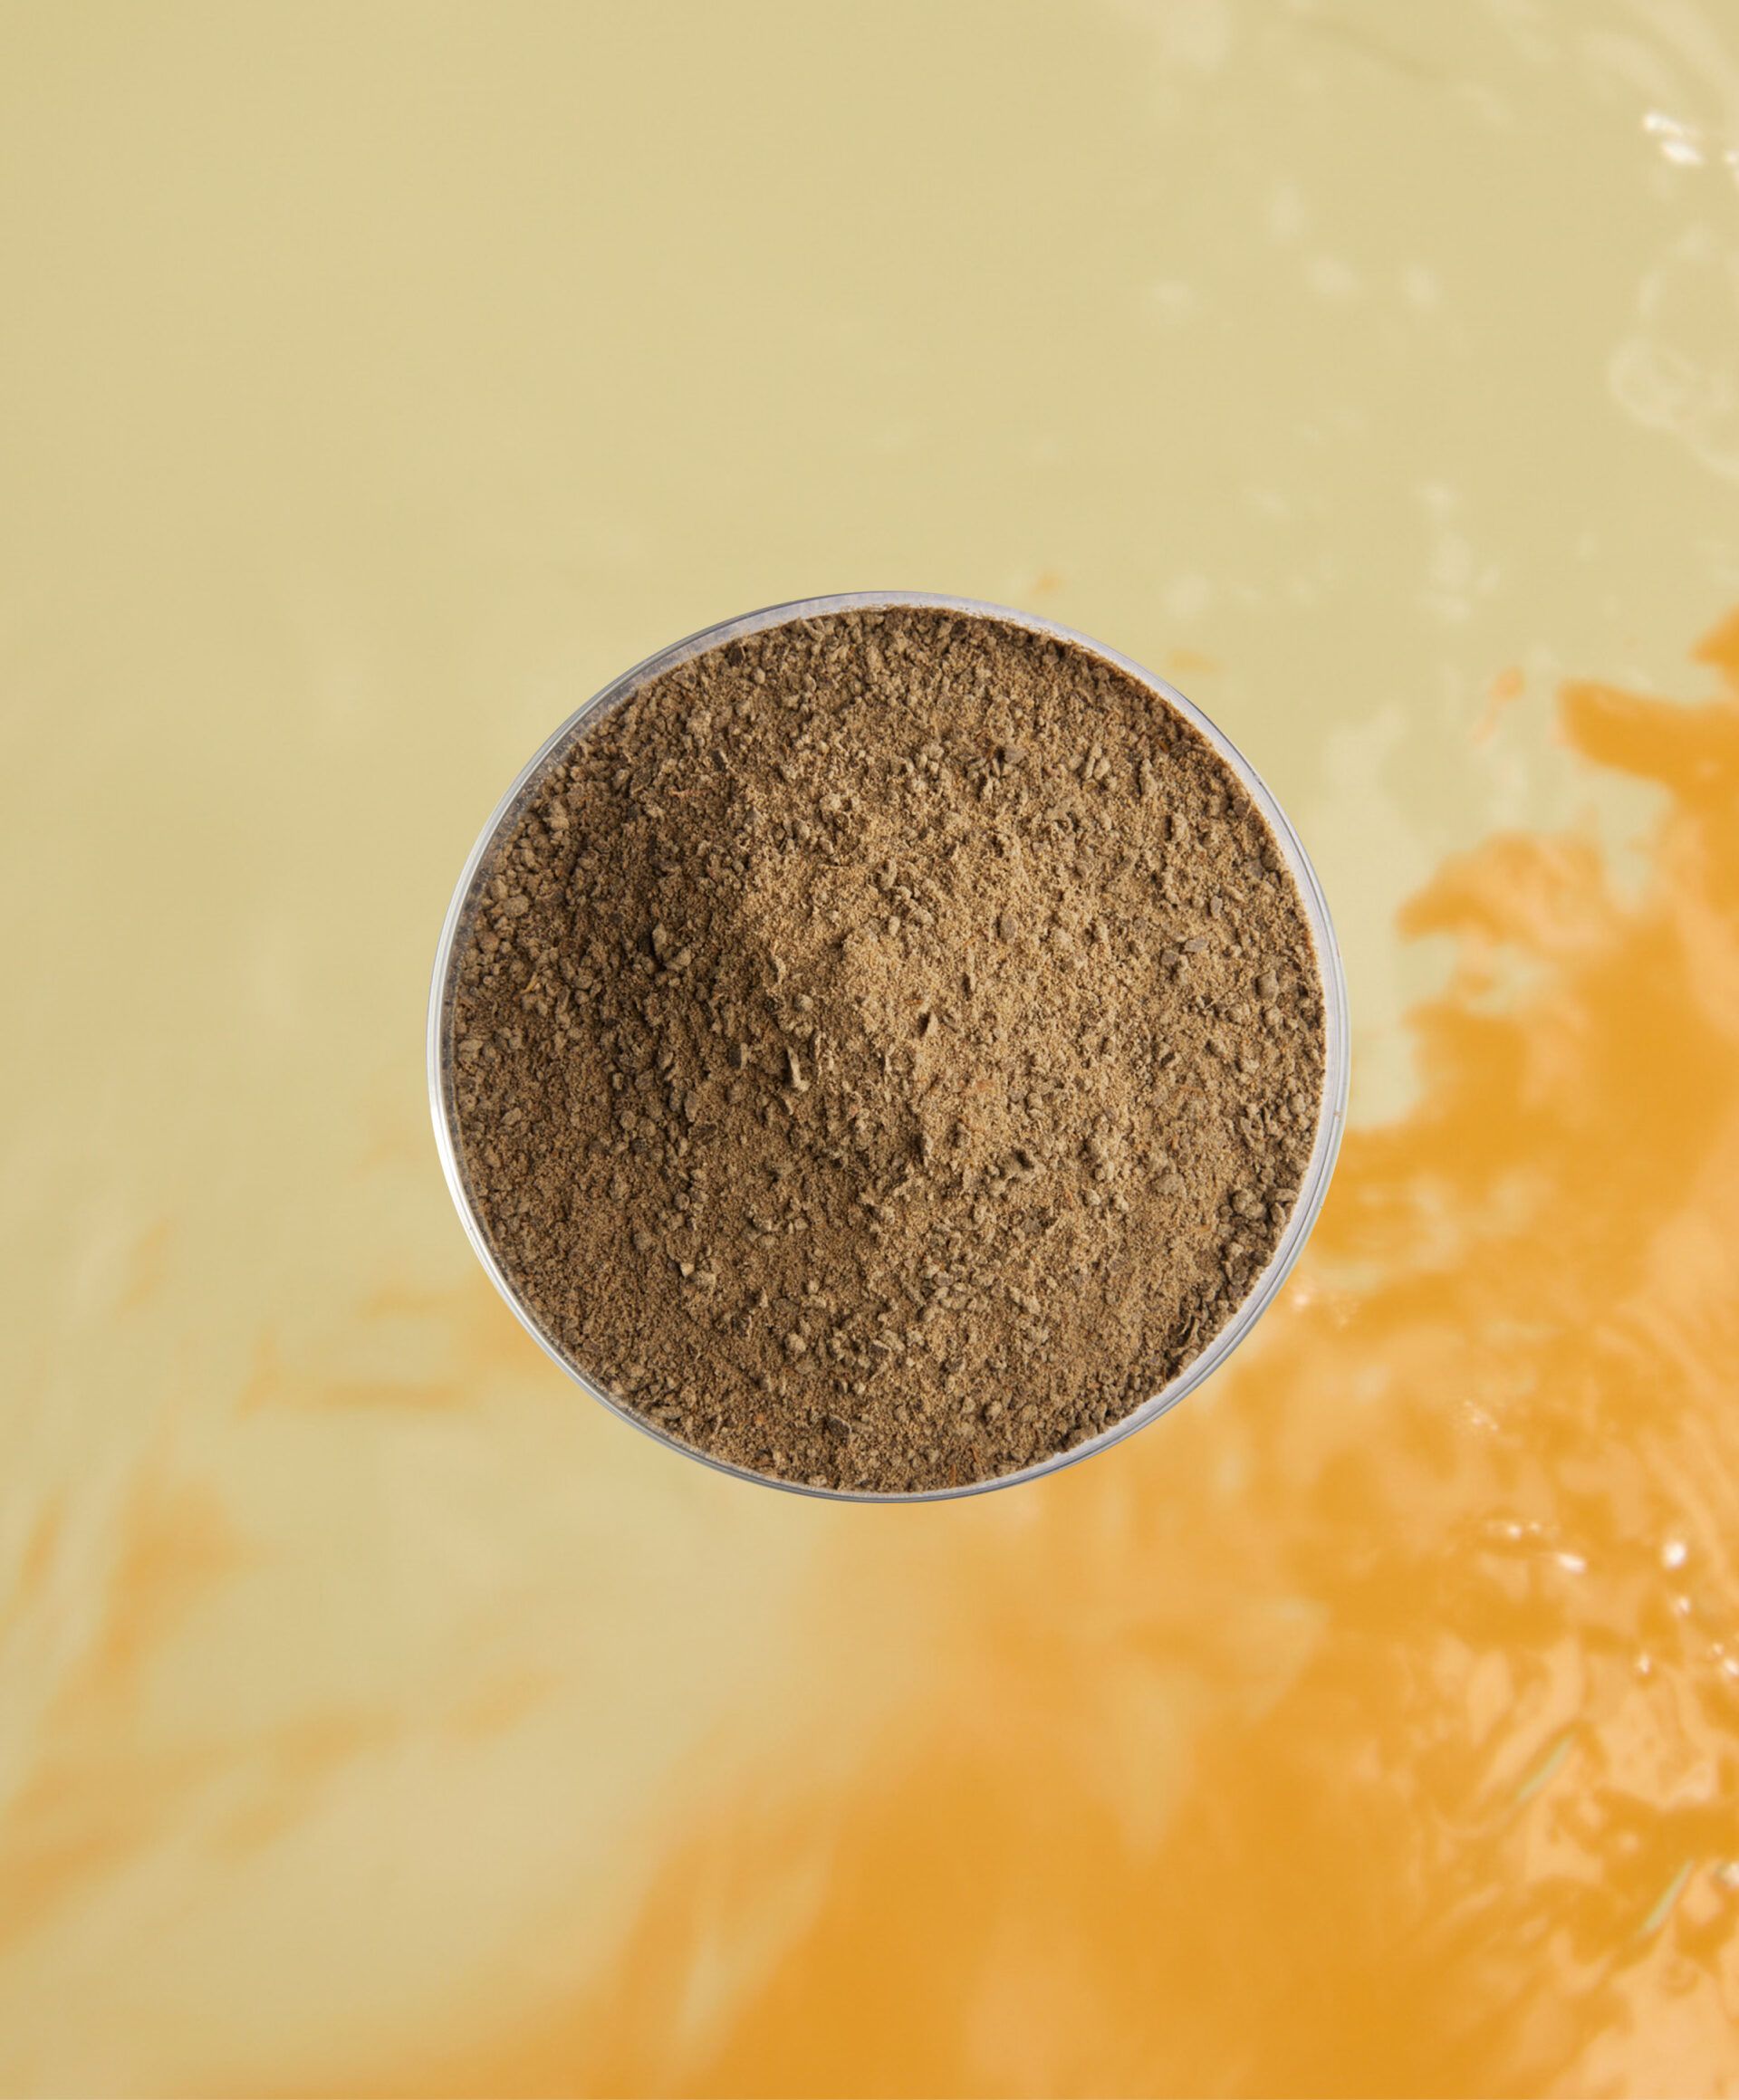 Earthy colored powder in a petri dish on a yellow background